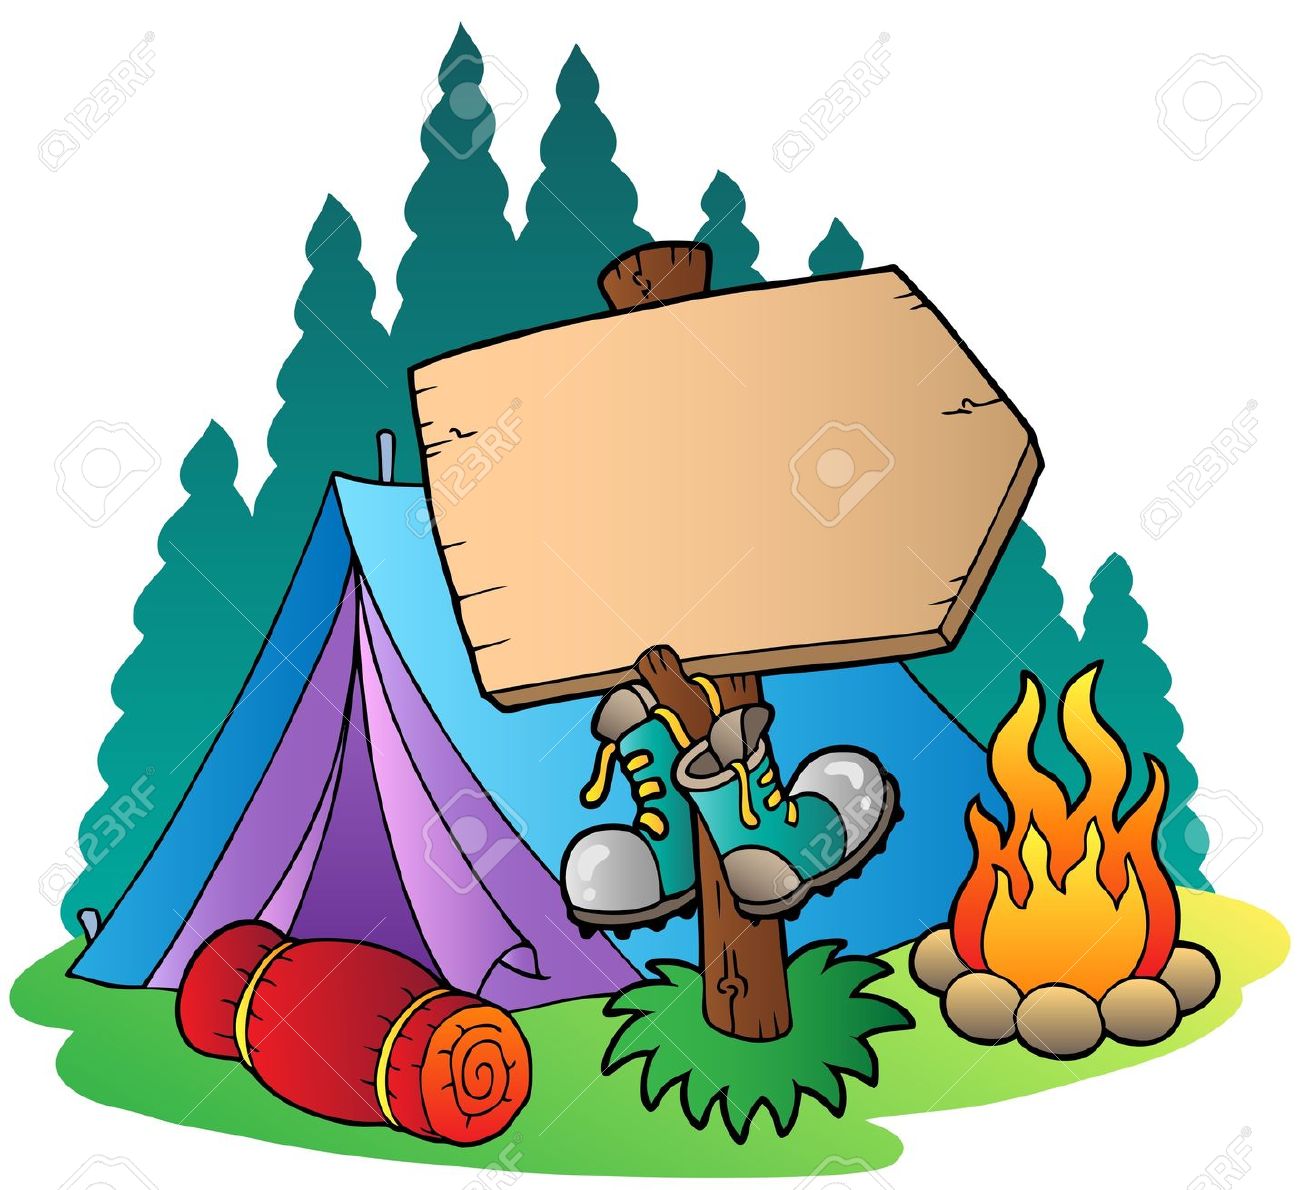 Camping clip art free - ClipartFest